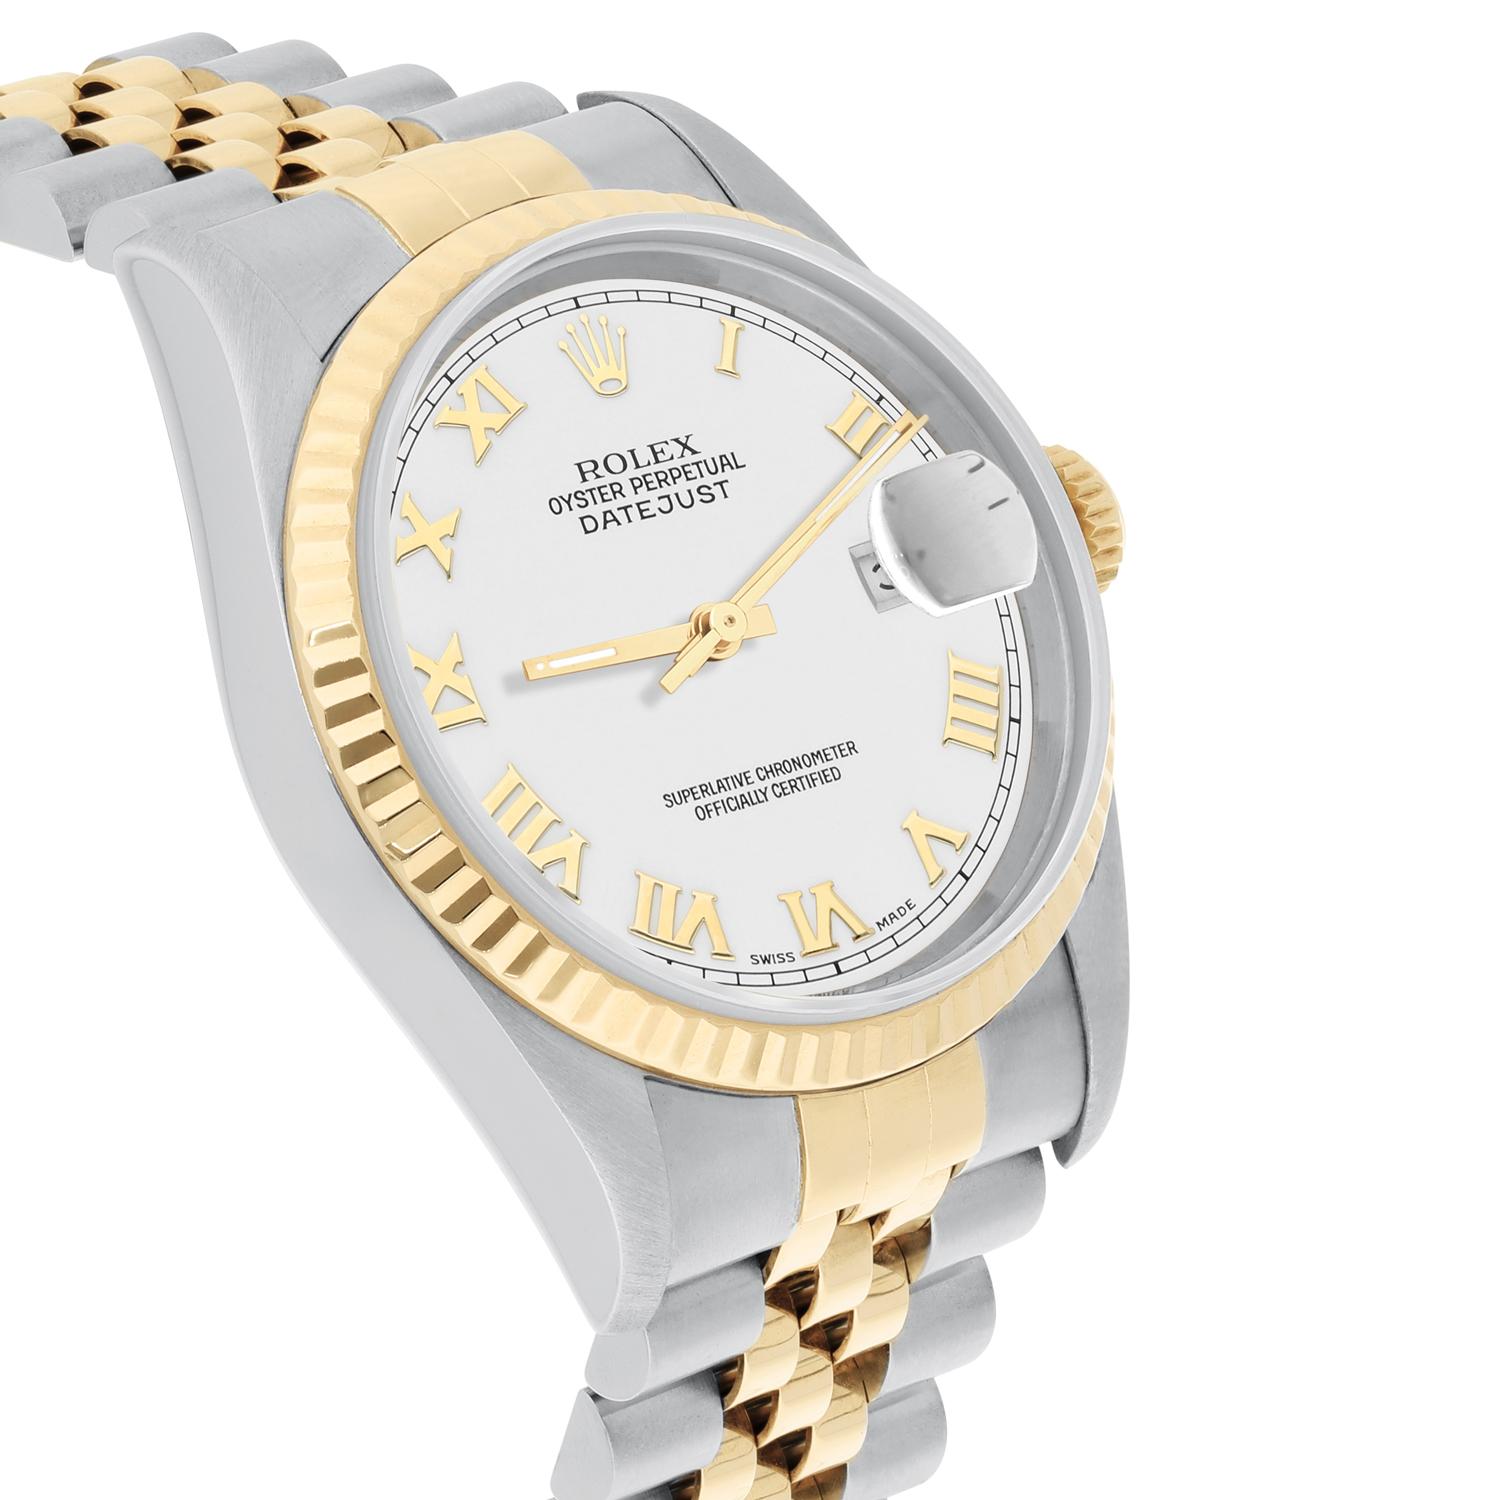 Rolex Datejust 36mm Two Tone White Roman Dial Jubilee 16233 Circa 1997 In Excellent Condition For Sale In New York, NY